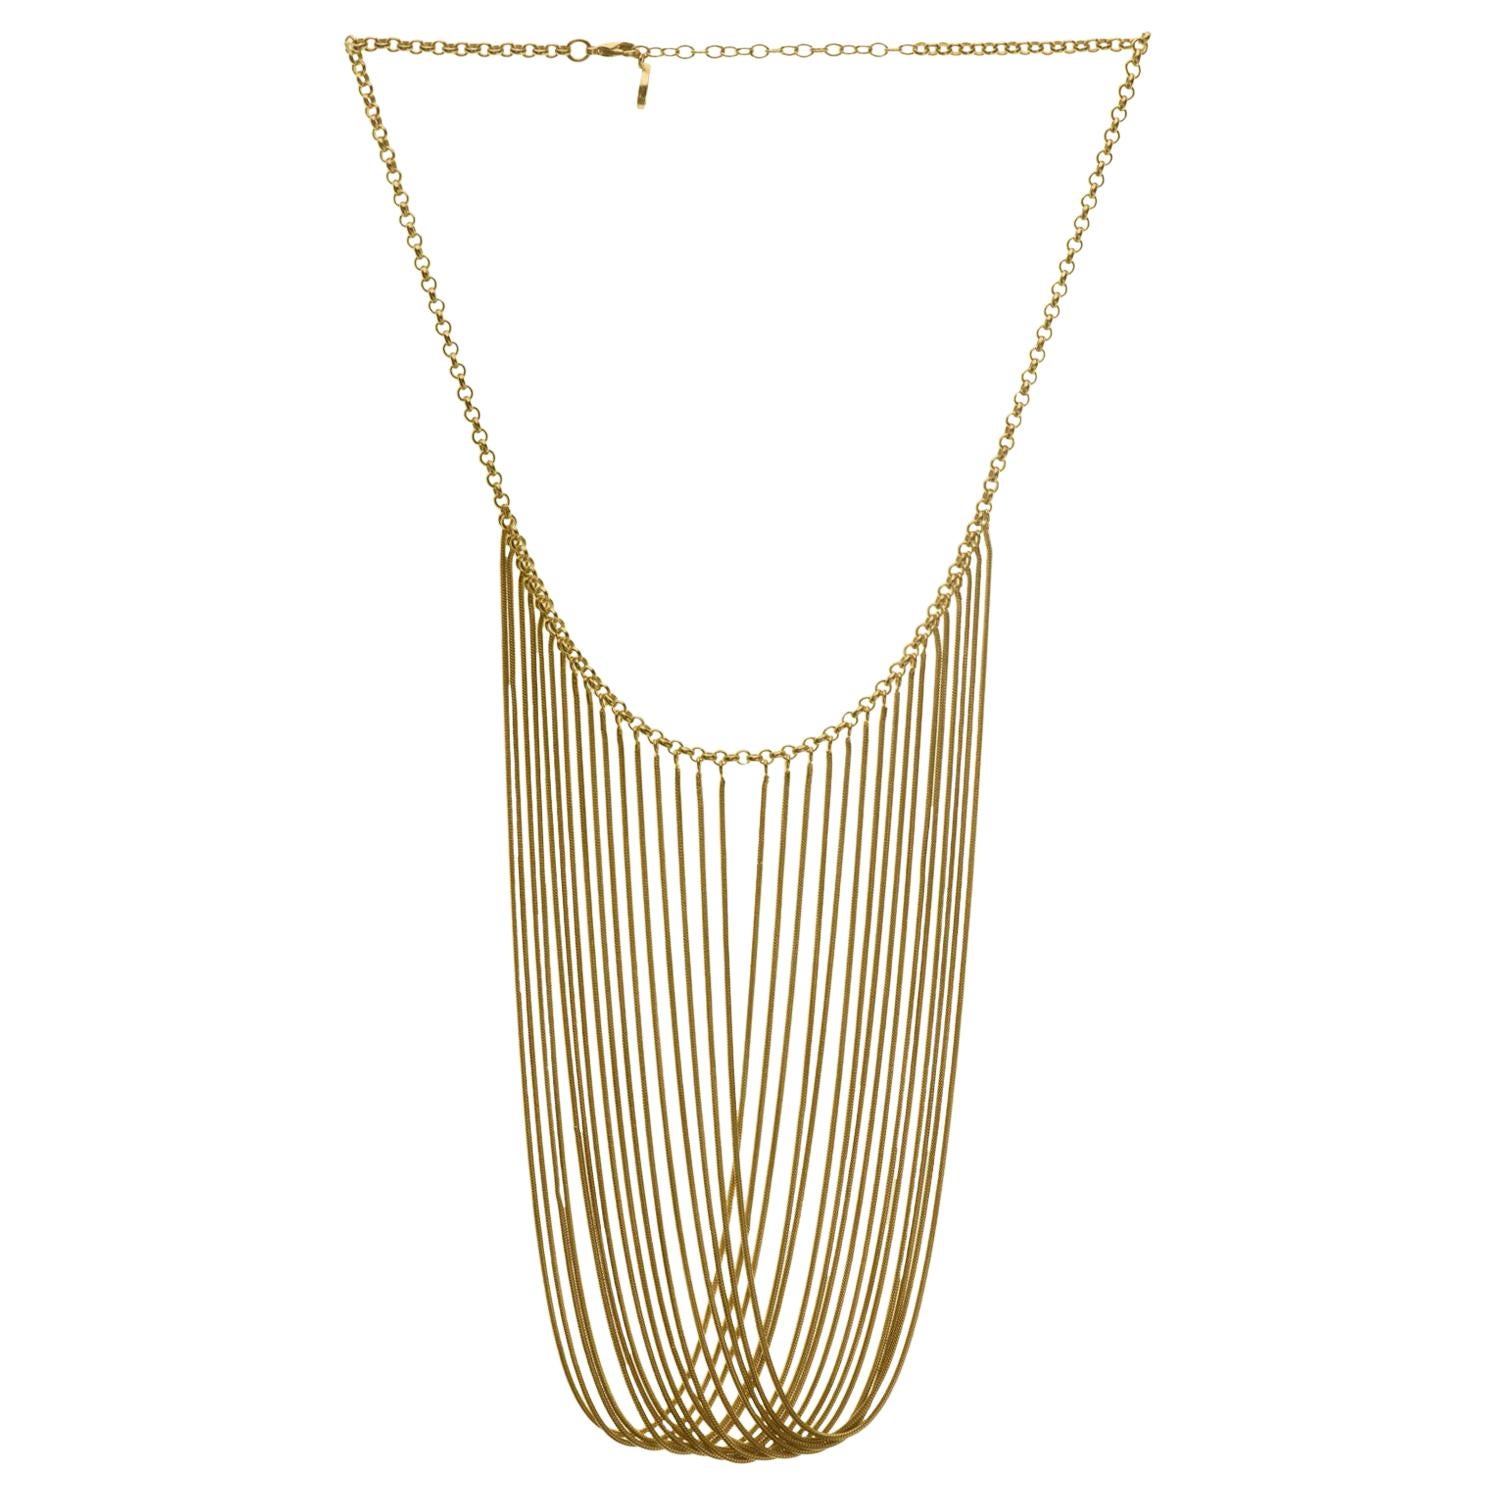 Necklace Statement Multi Snake Chain Gold-Plated Brass Greek Jewelry For Sale